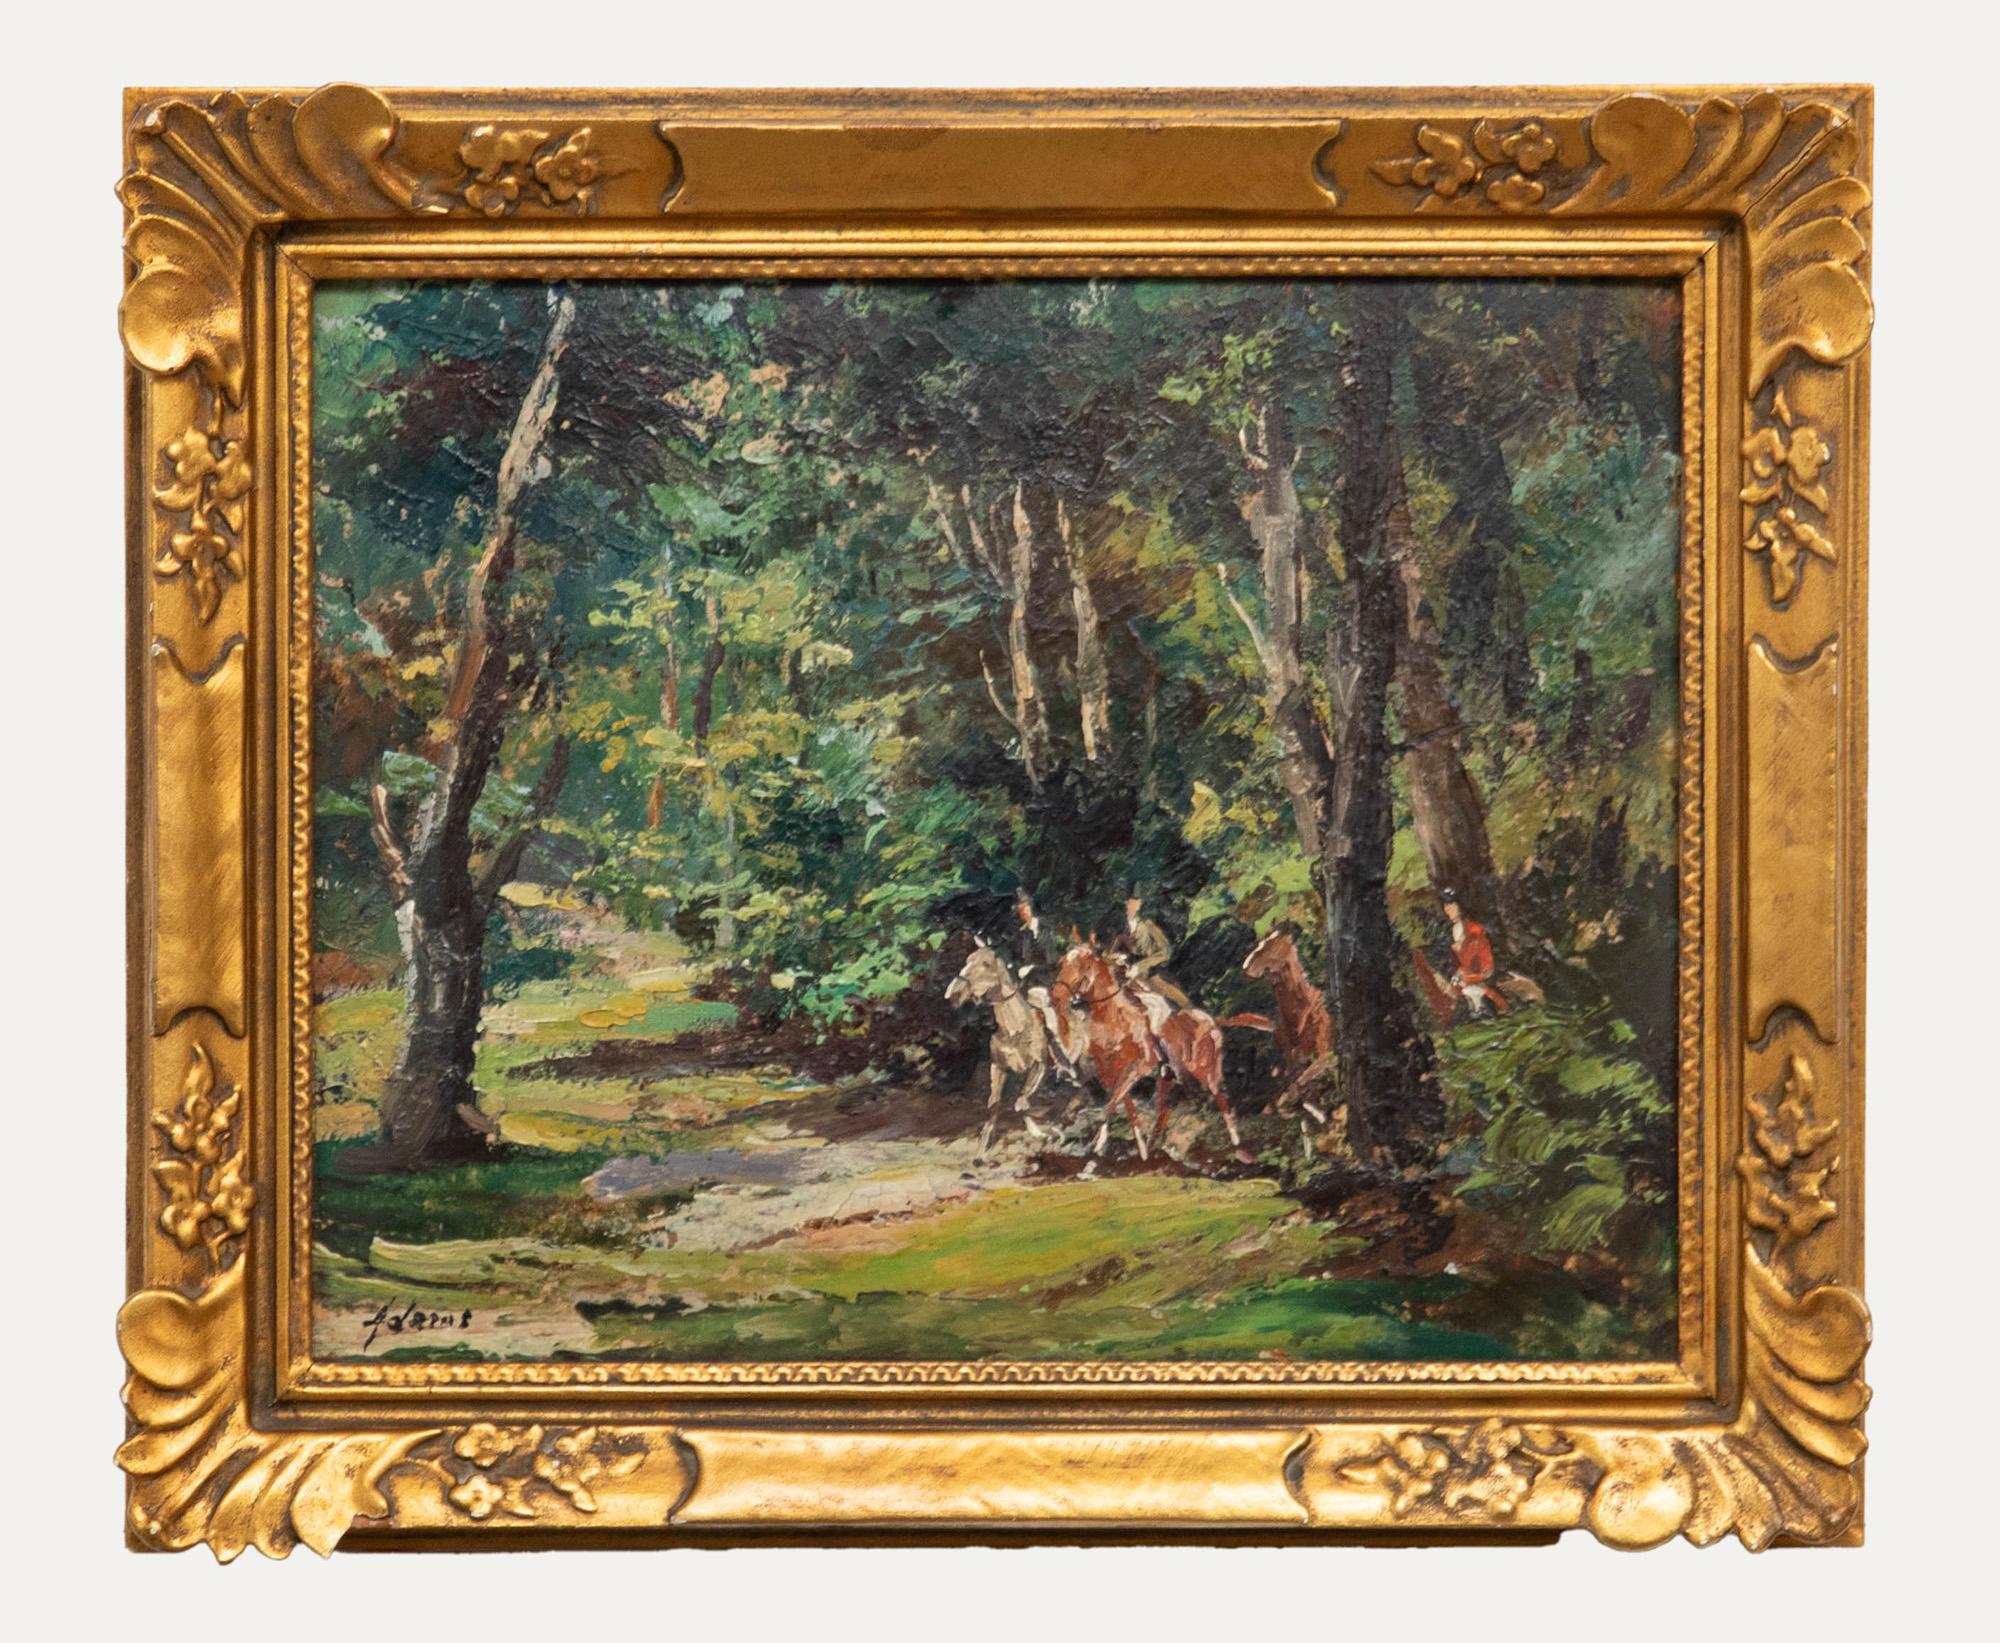 Hunting scene in oil. Signed 'Adams' lower right. Presented in a decorative gilt-effect frame with a signed Peerart label verso. On board.